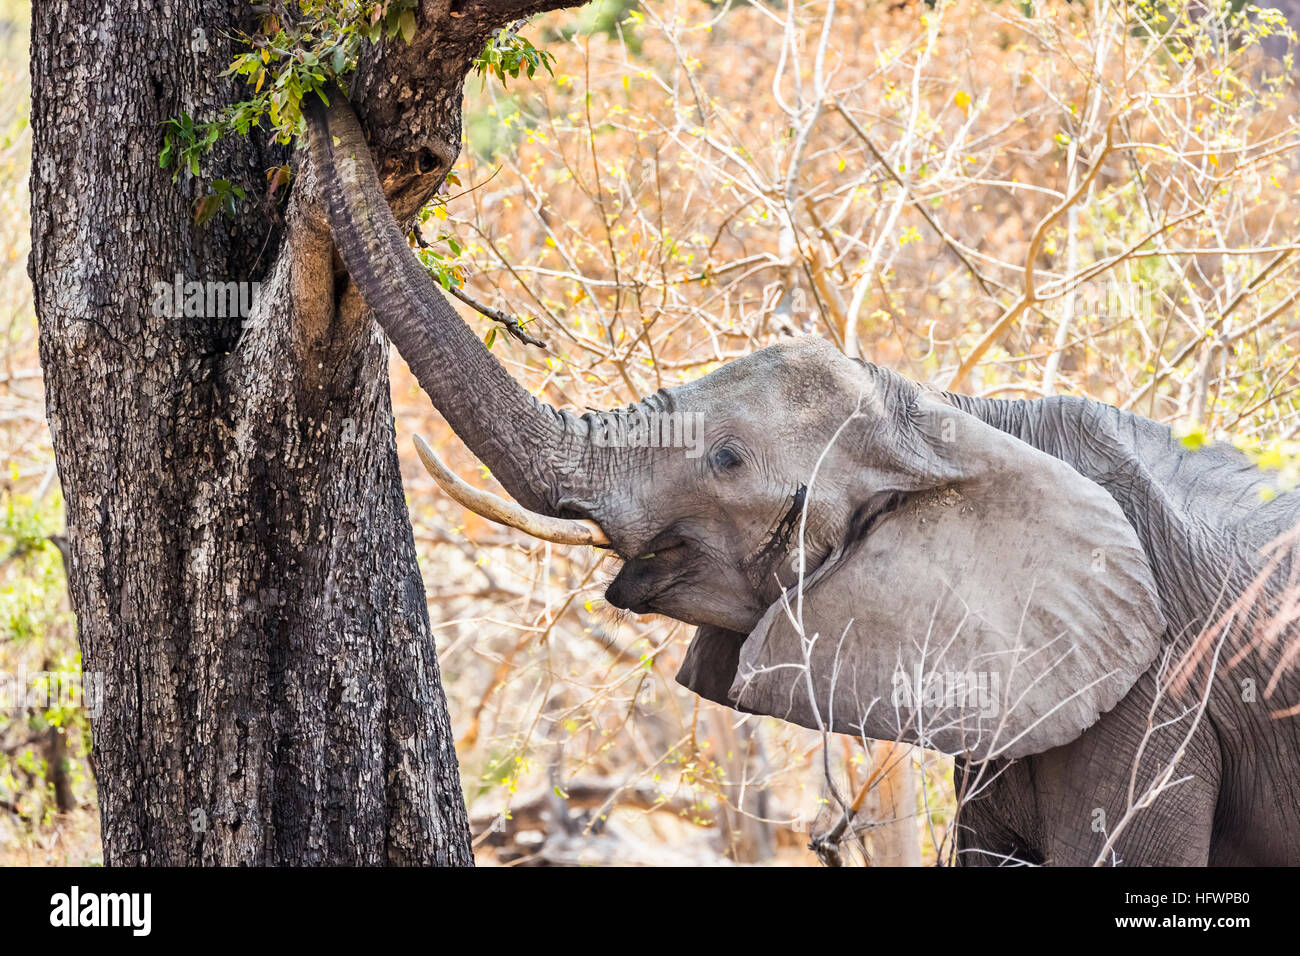 African bush elephant (Loxodonta africana) reaching up with its trunk to eat leaves from a tree, Sandibe Camp, by the Moremi Game Reserve Stock Photo